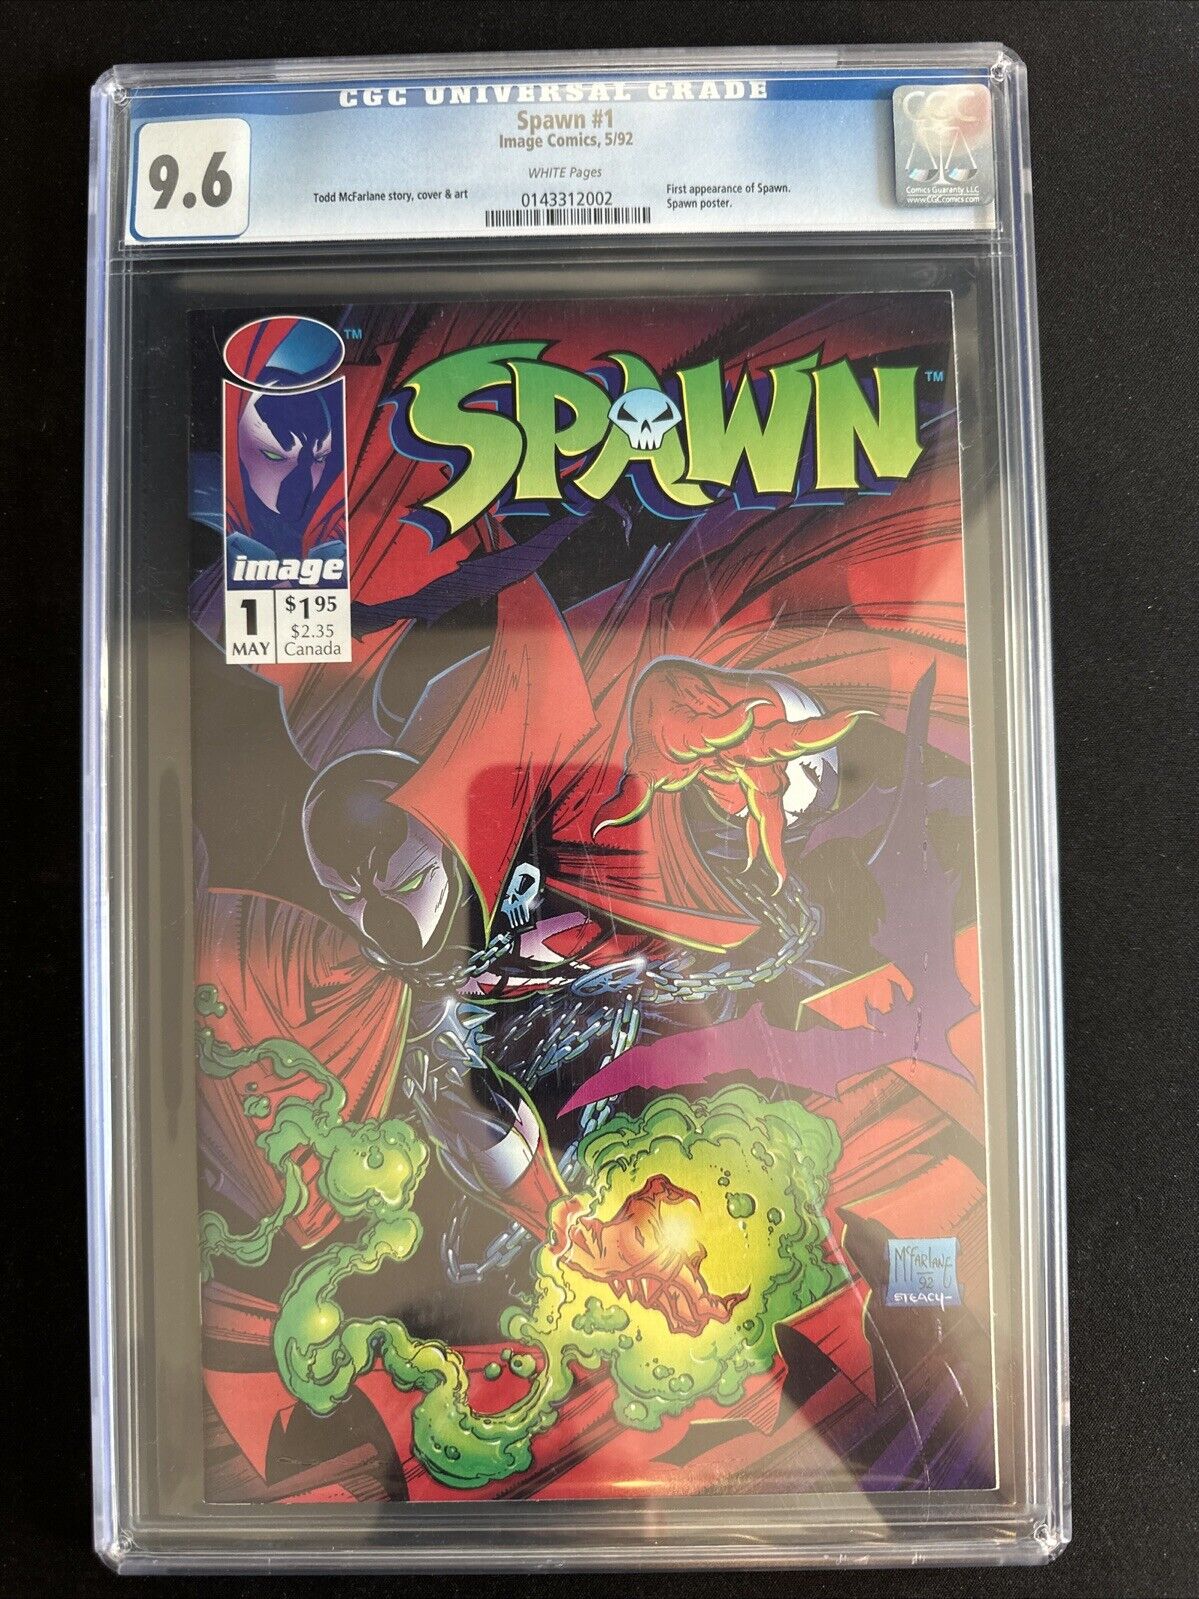 Spawn #1 CGC 9.6 Old Label White Pages Image Comics 1992 McFarlane 1st Print